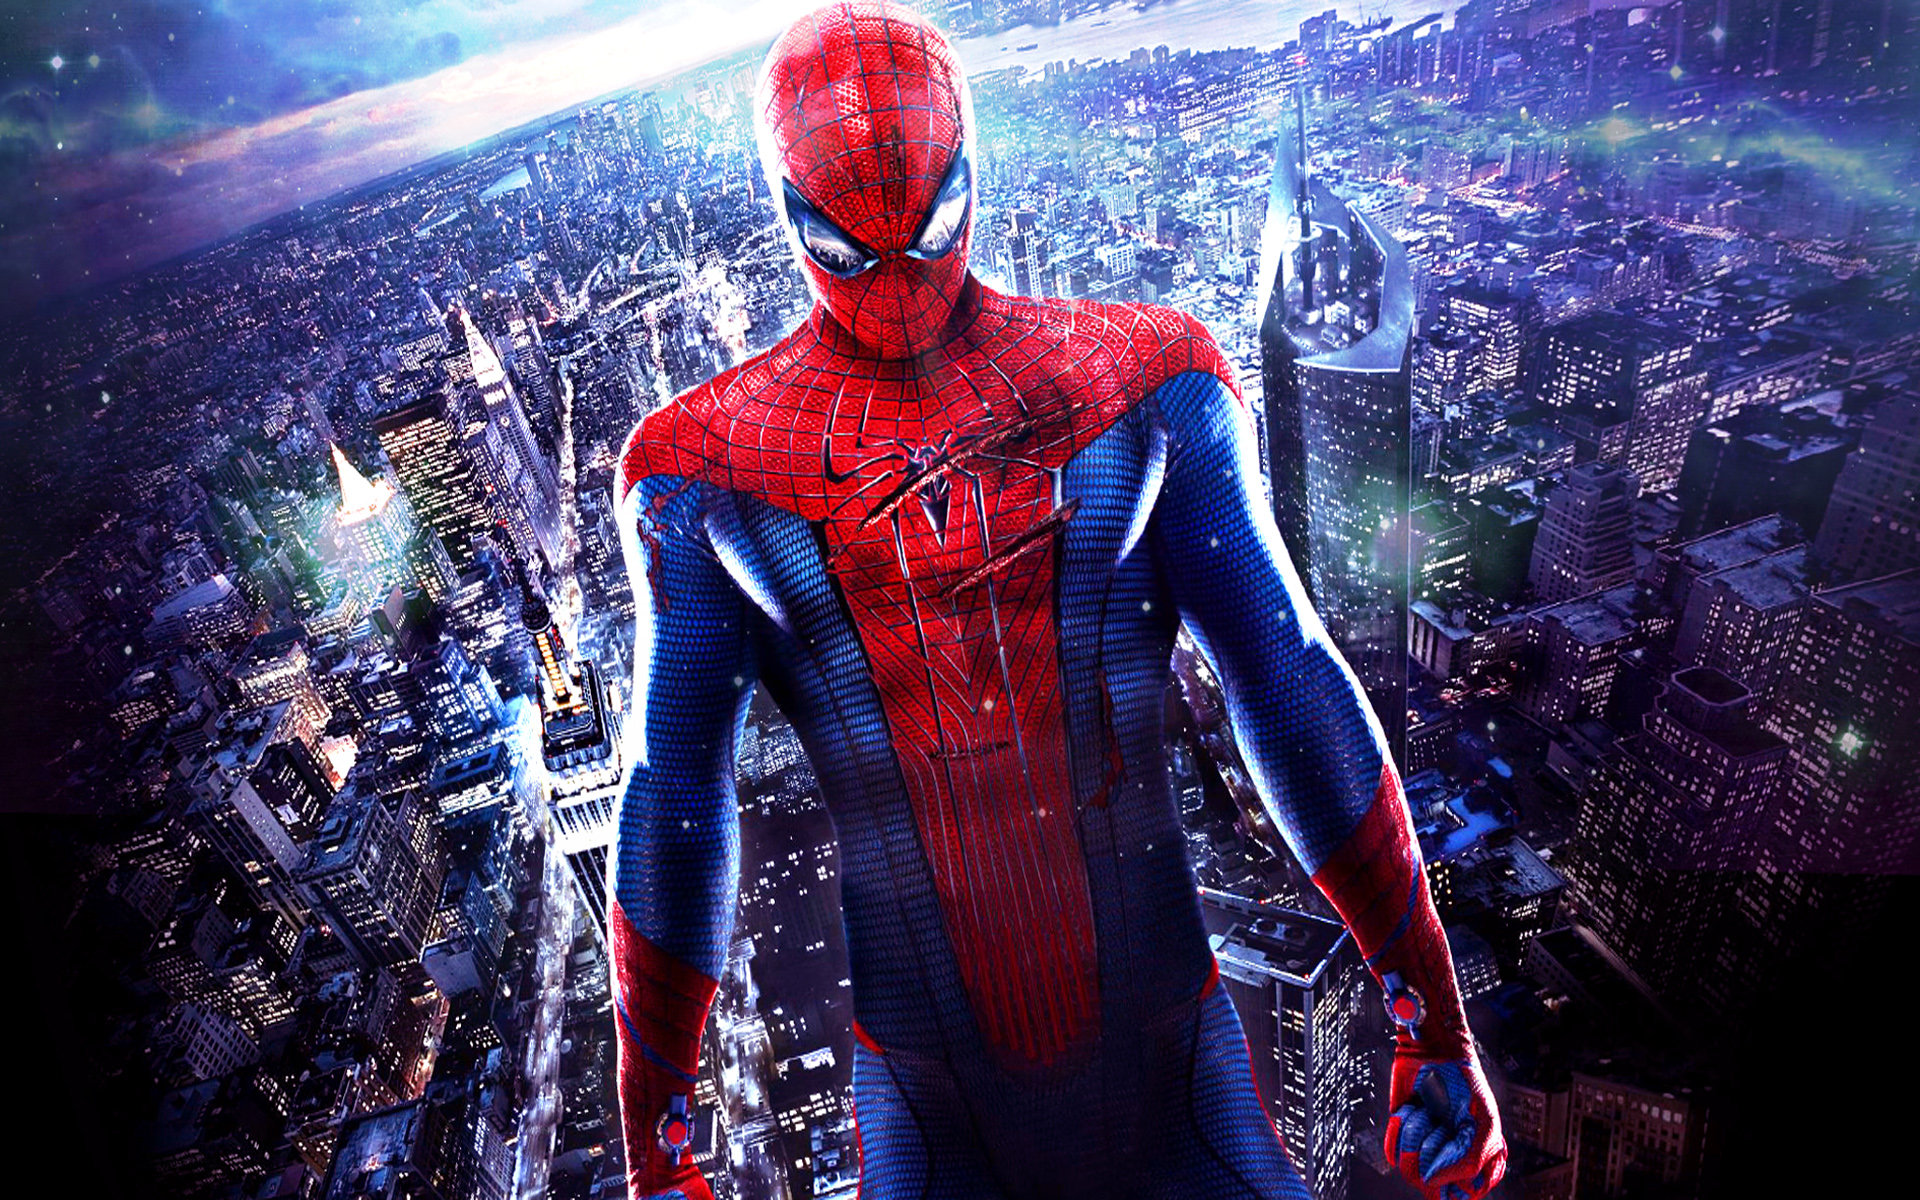 Awesome Spider-Man Movie free wallpaper ID:196071 for hd 1920x1200 desktop